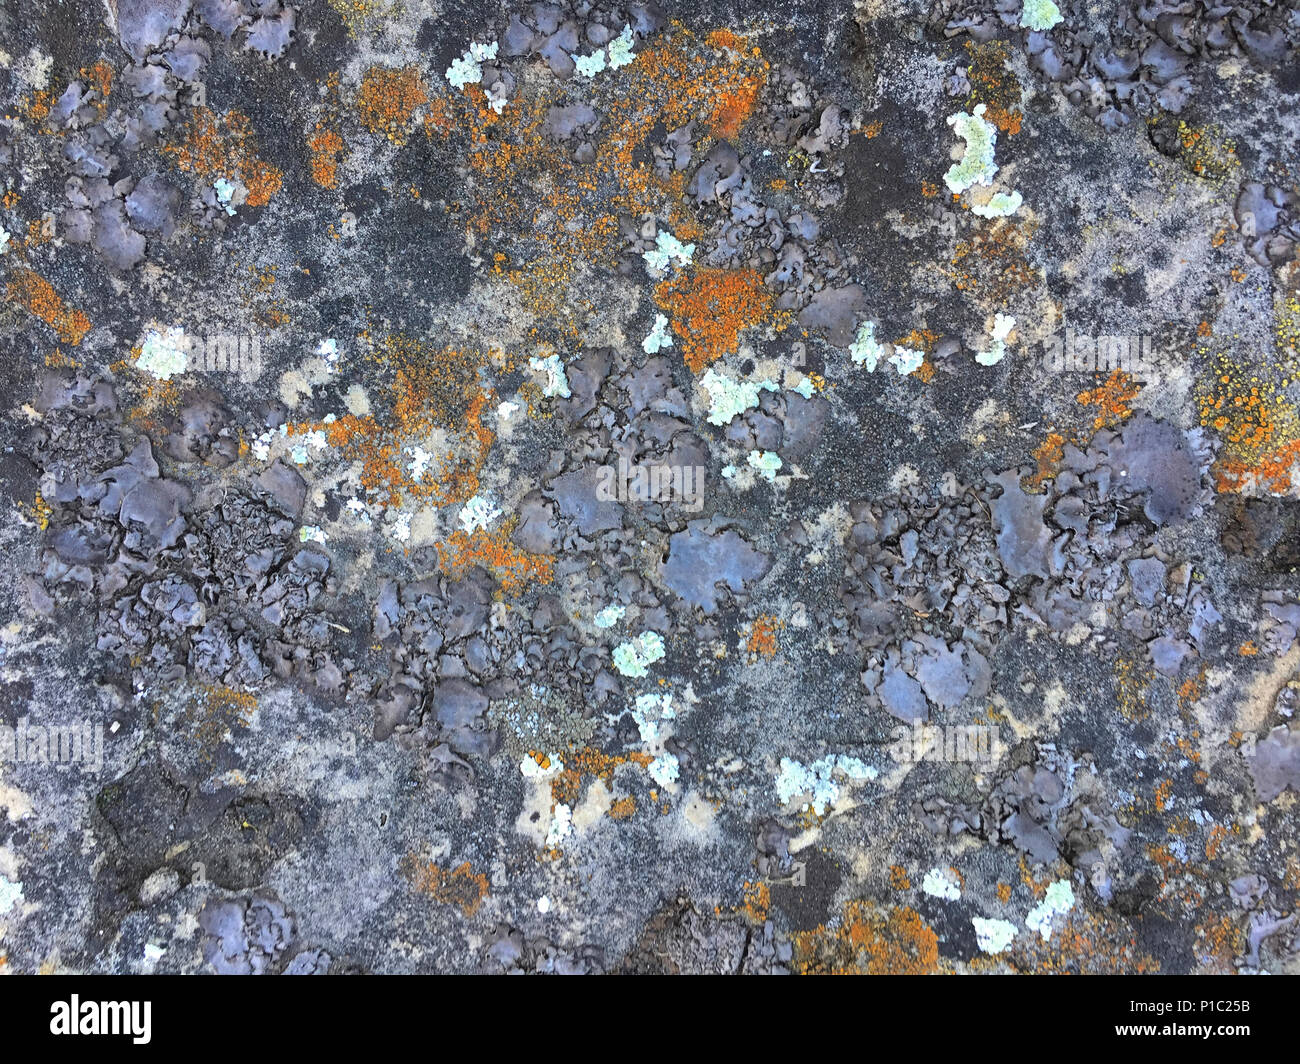 A beautiful texture of living and dying lichen growing on a limestone rock at Dewey Nelson State Park in Wisconsin. Stock Photo